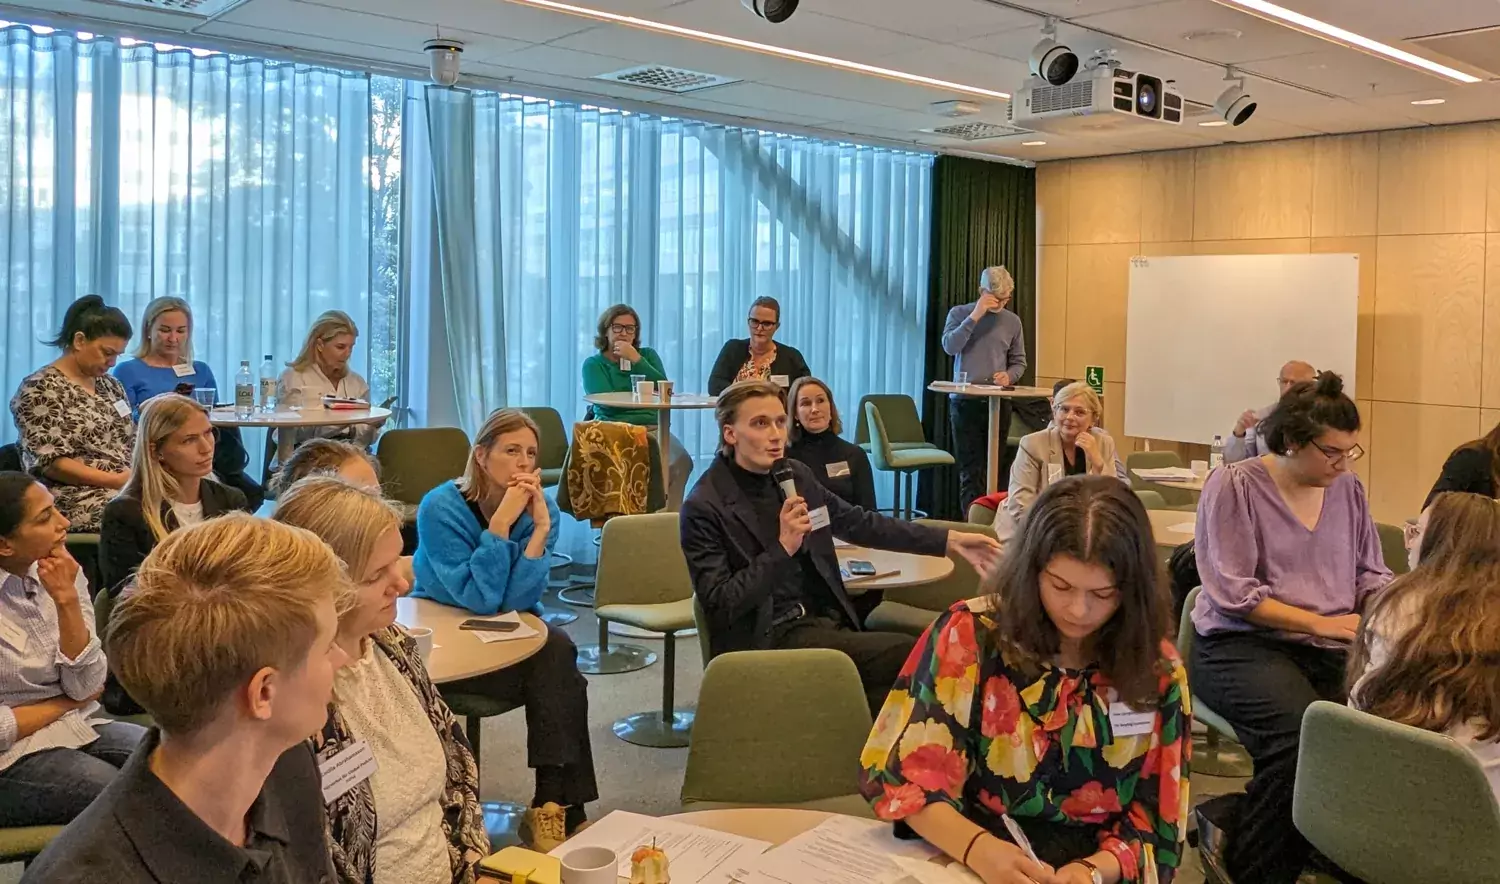 Discussion on the political economy of adolescent mental health and well-being in Sweden.